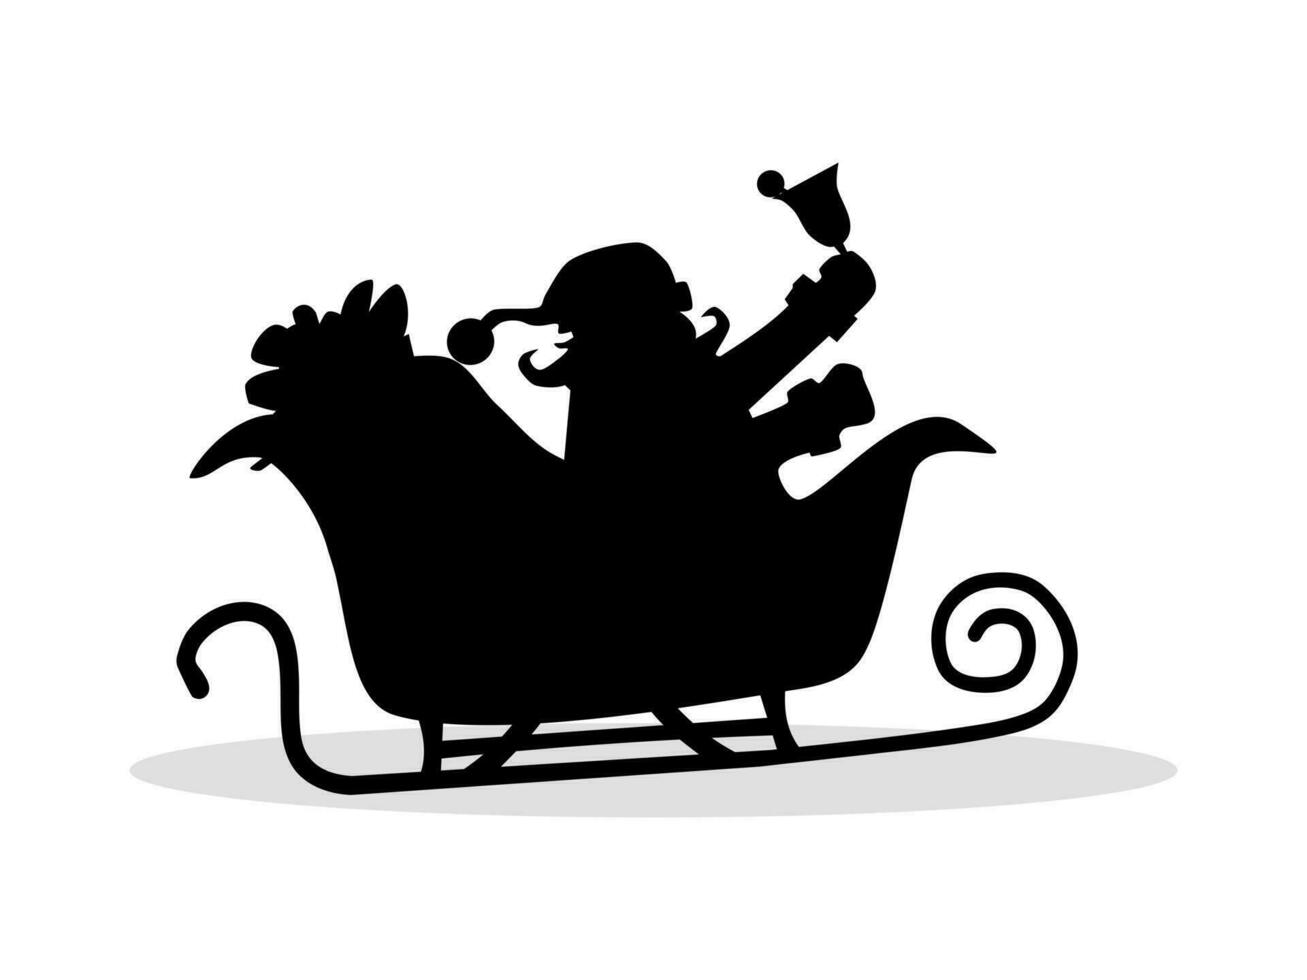 Vector illustrations of silhouette of Santa Claus flying on sleigh